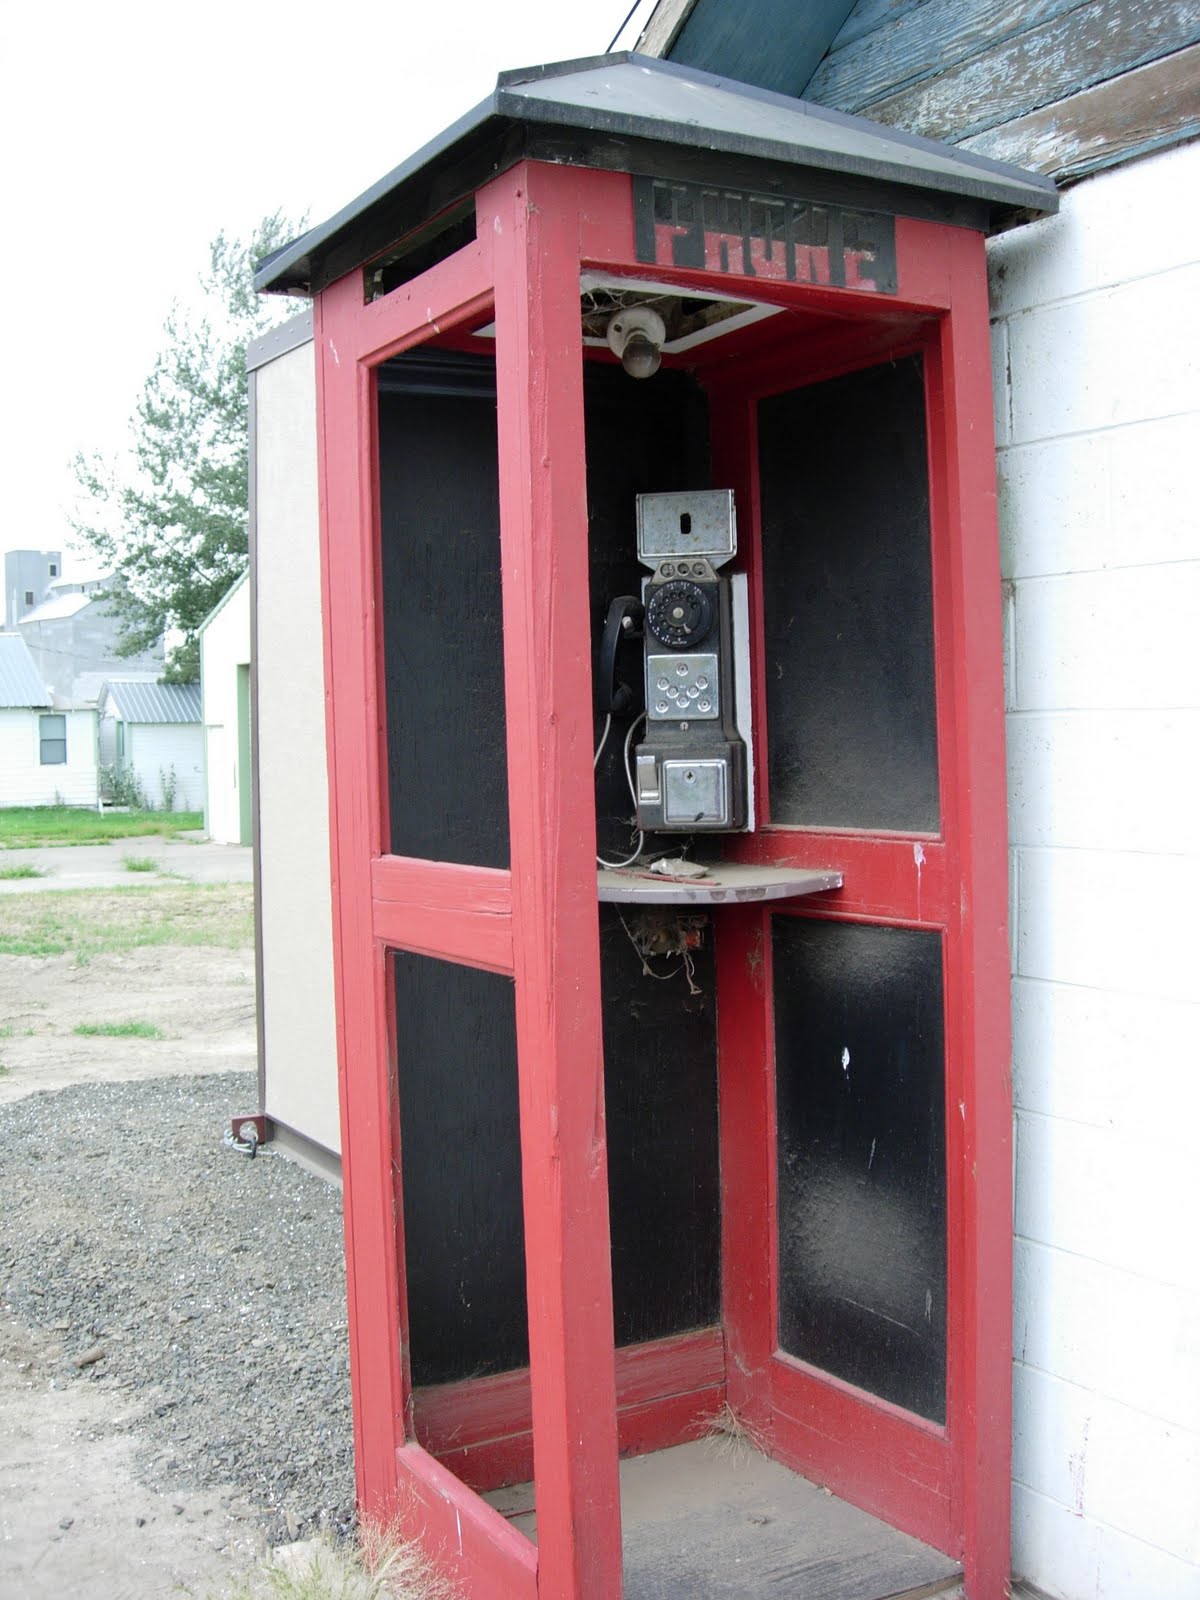 Technical Travels: Old Telephone Booth